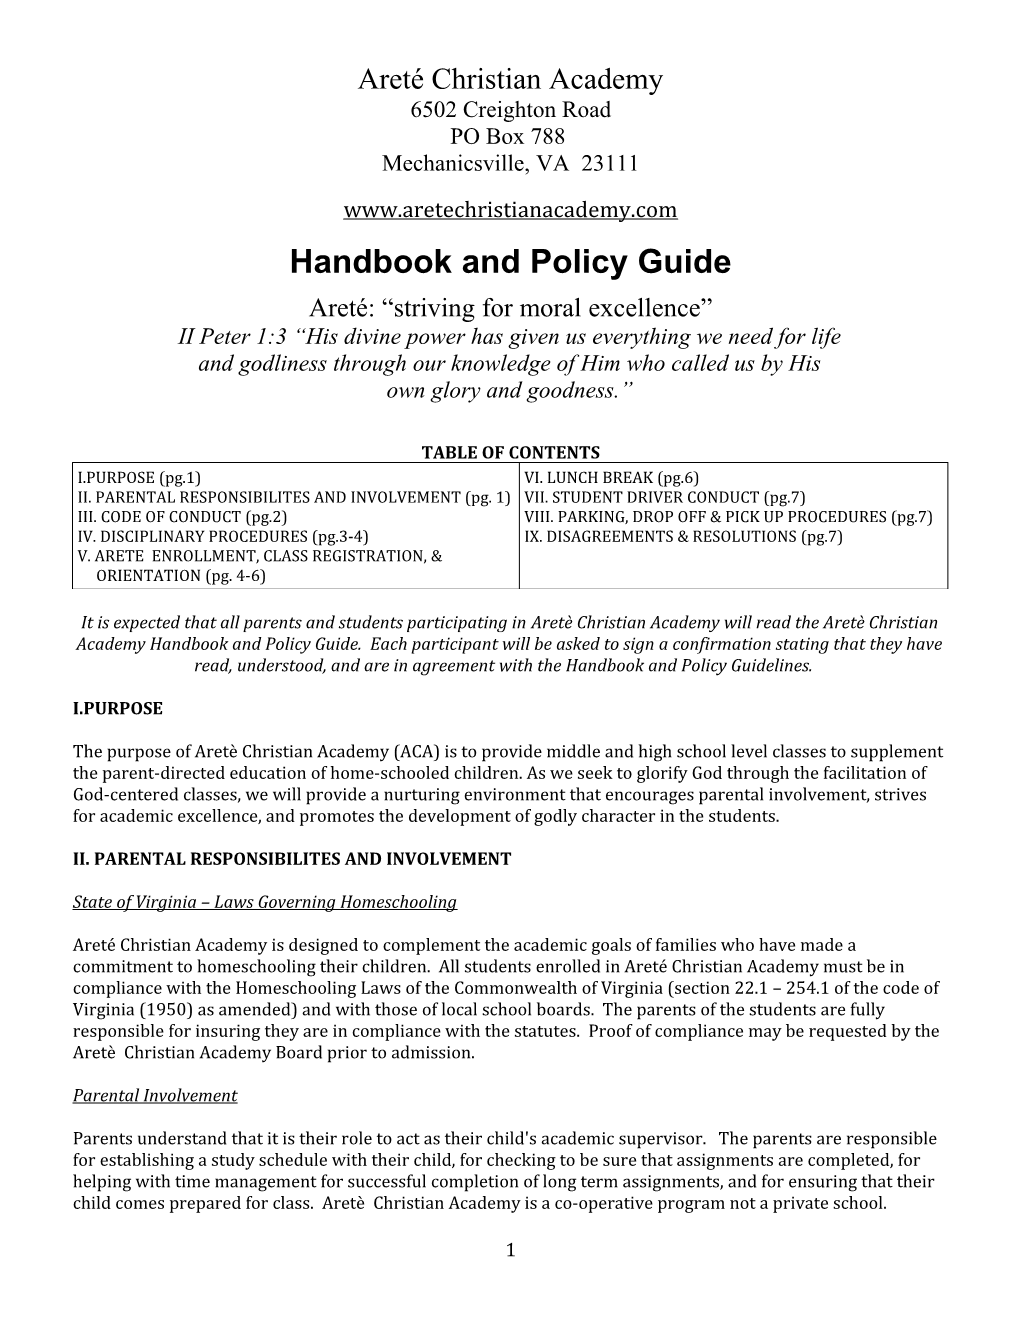 Handbook and Policy Guide